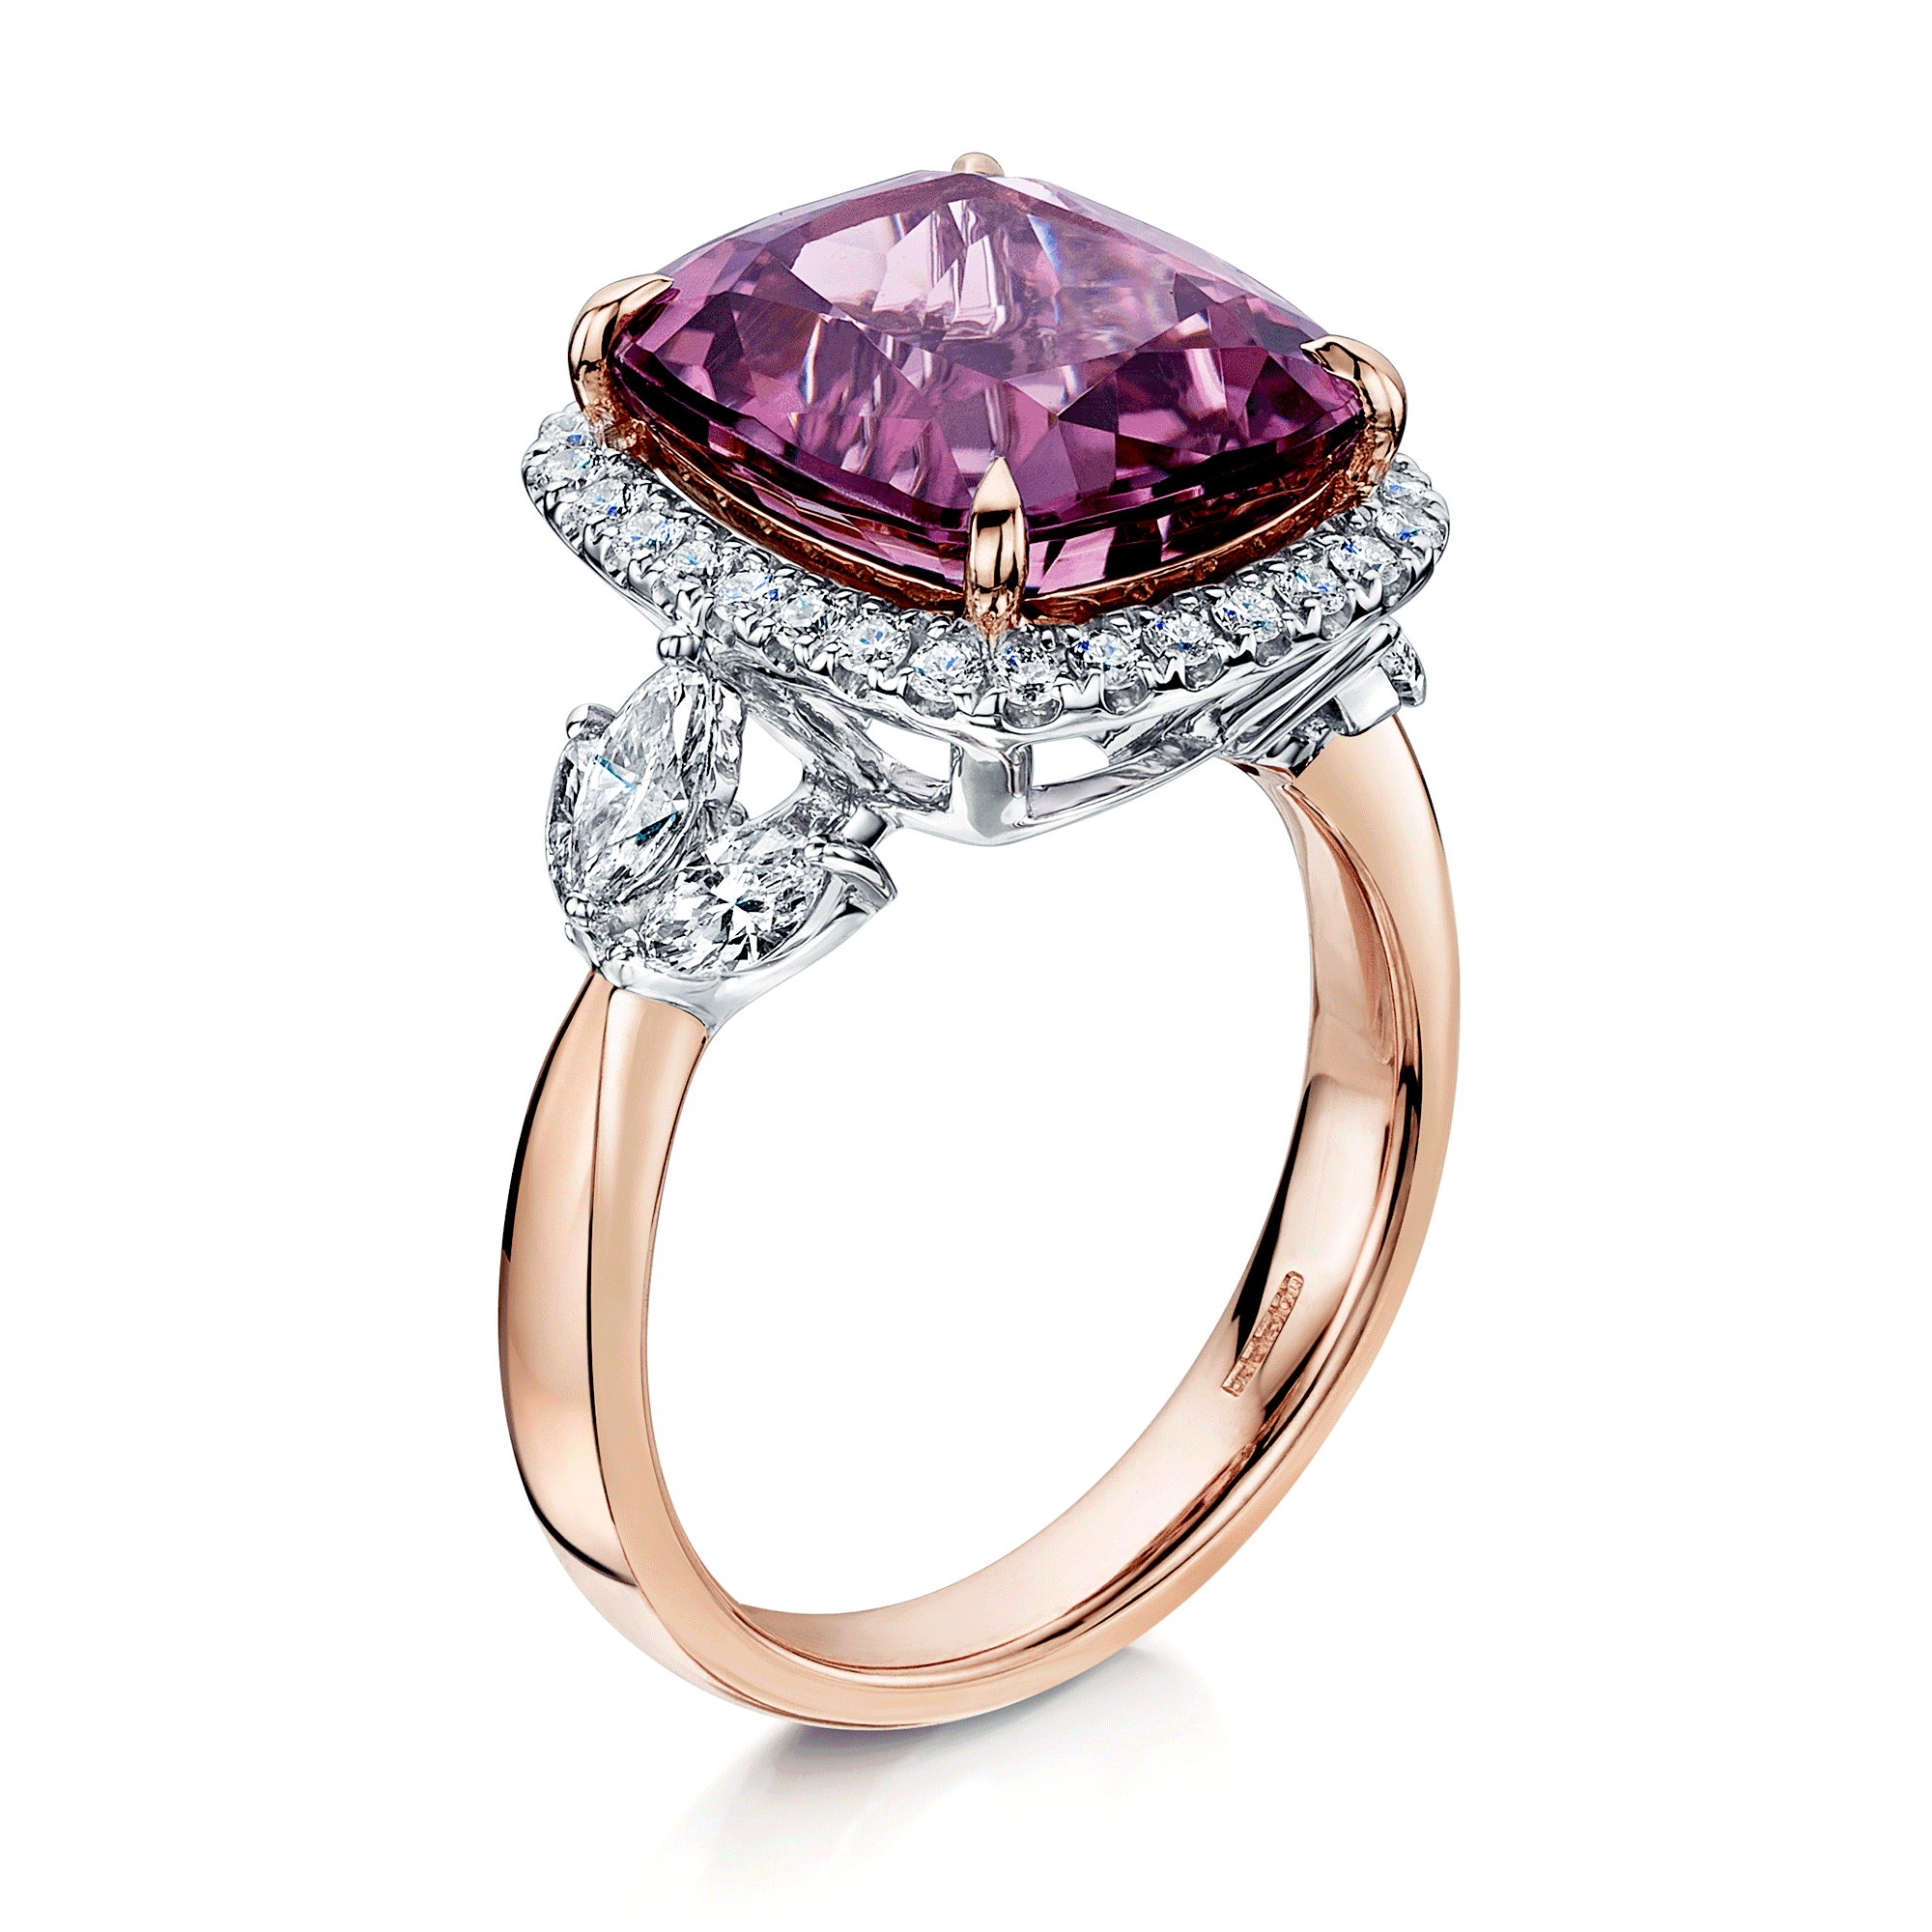 18ct Rose & White Gold Cushion Cut Pink Tourmaline Diamond Halo Ring With Marquise Cut Diamond Shoulders